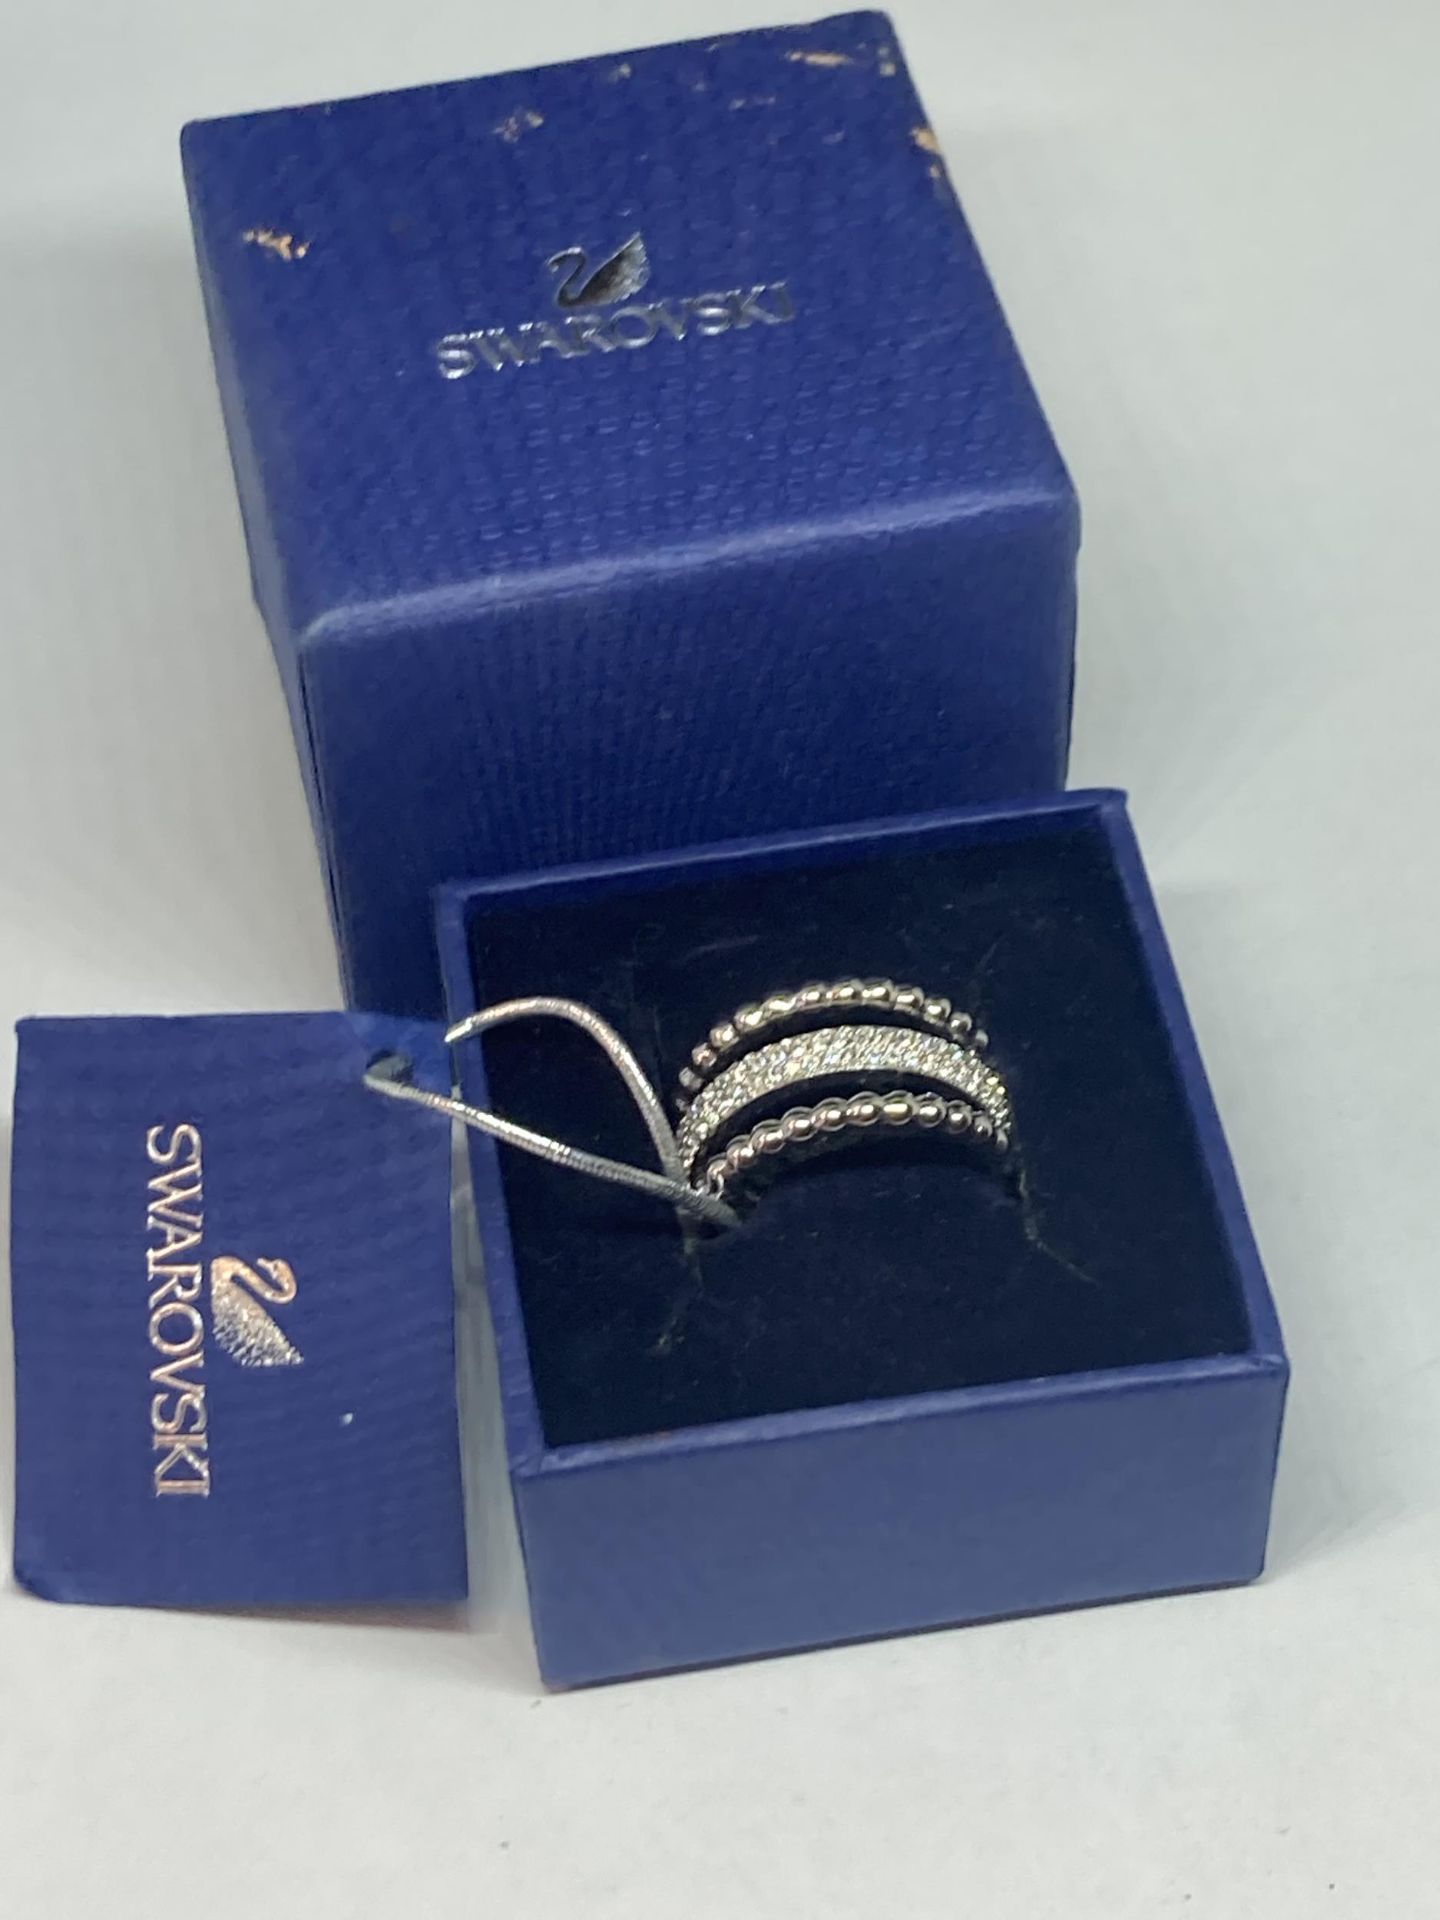 A SWAROVSKI CRYSTAL RING SIZE Q/R WITH LABEL AND PRESENTATION BOX - Image 4 of 4